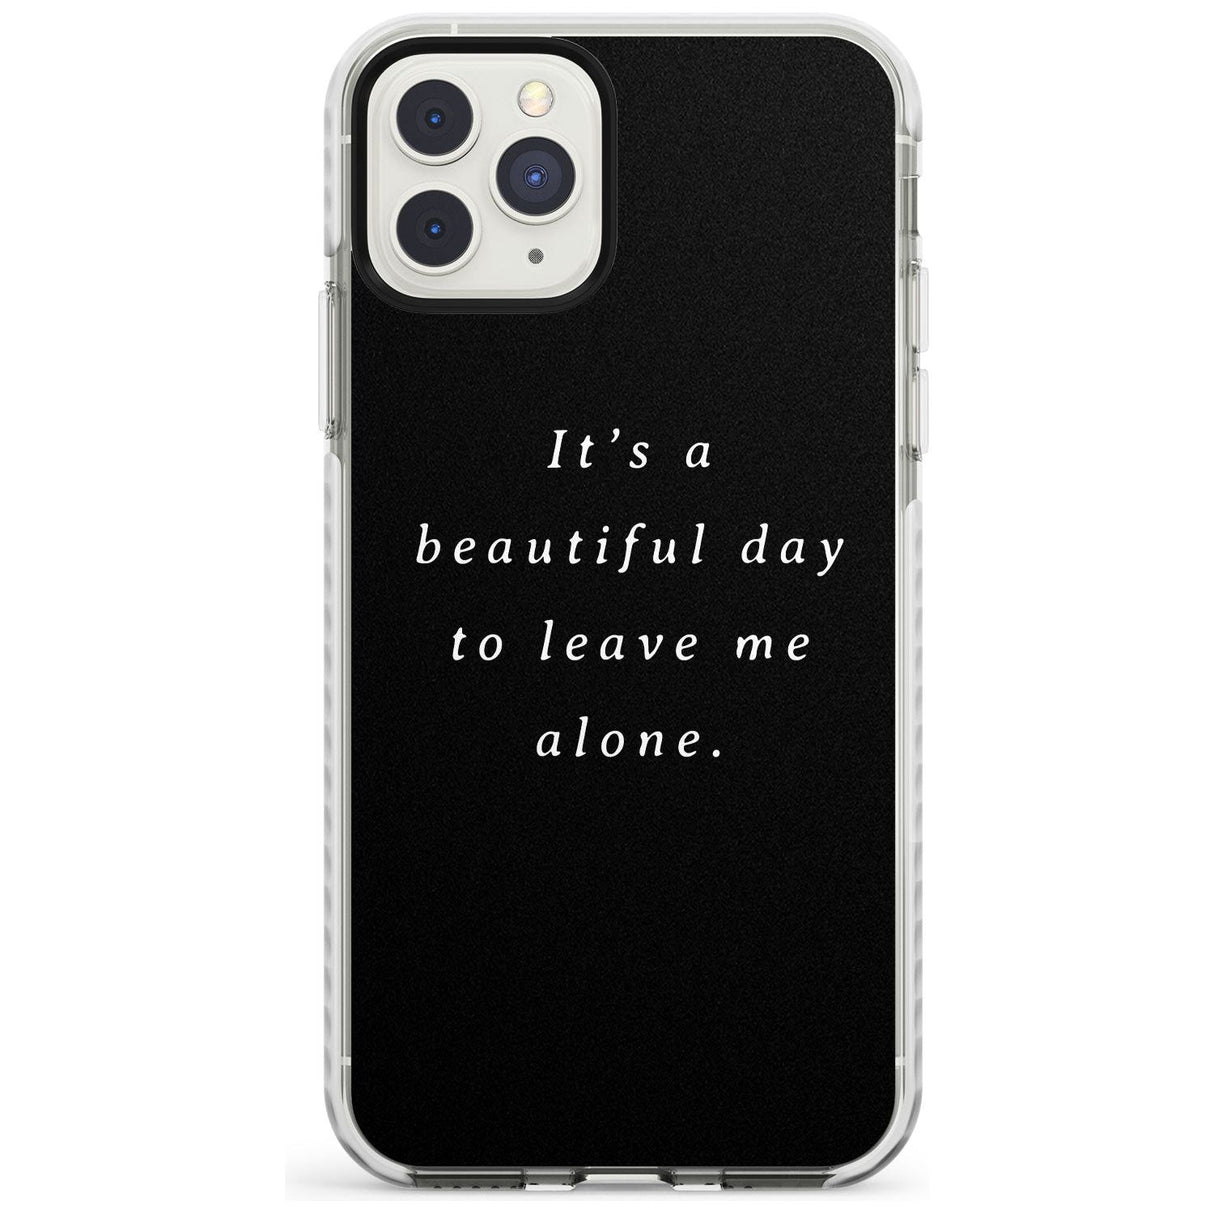 Leave me alone Impact Phone Case for iPhone 11 Pro Max